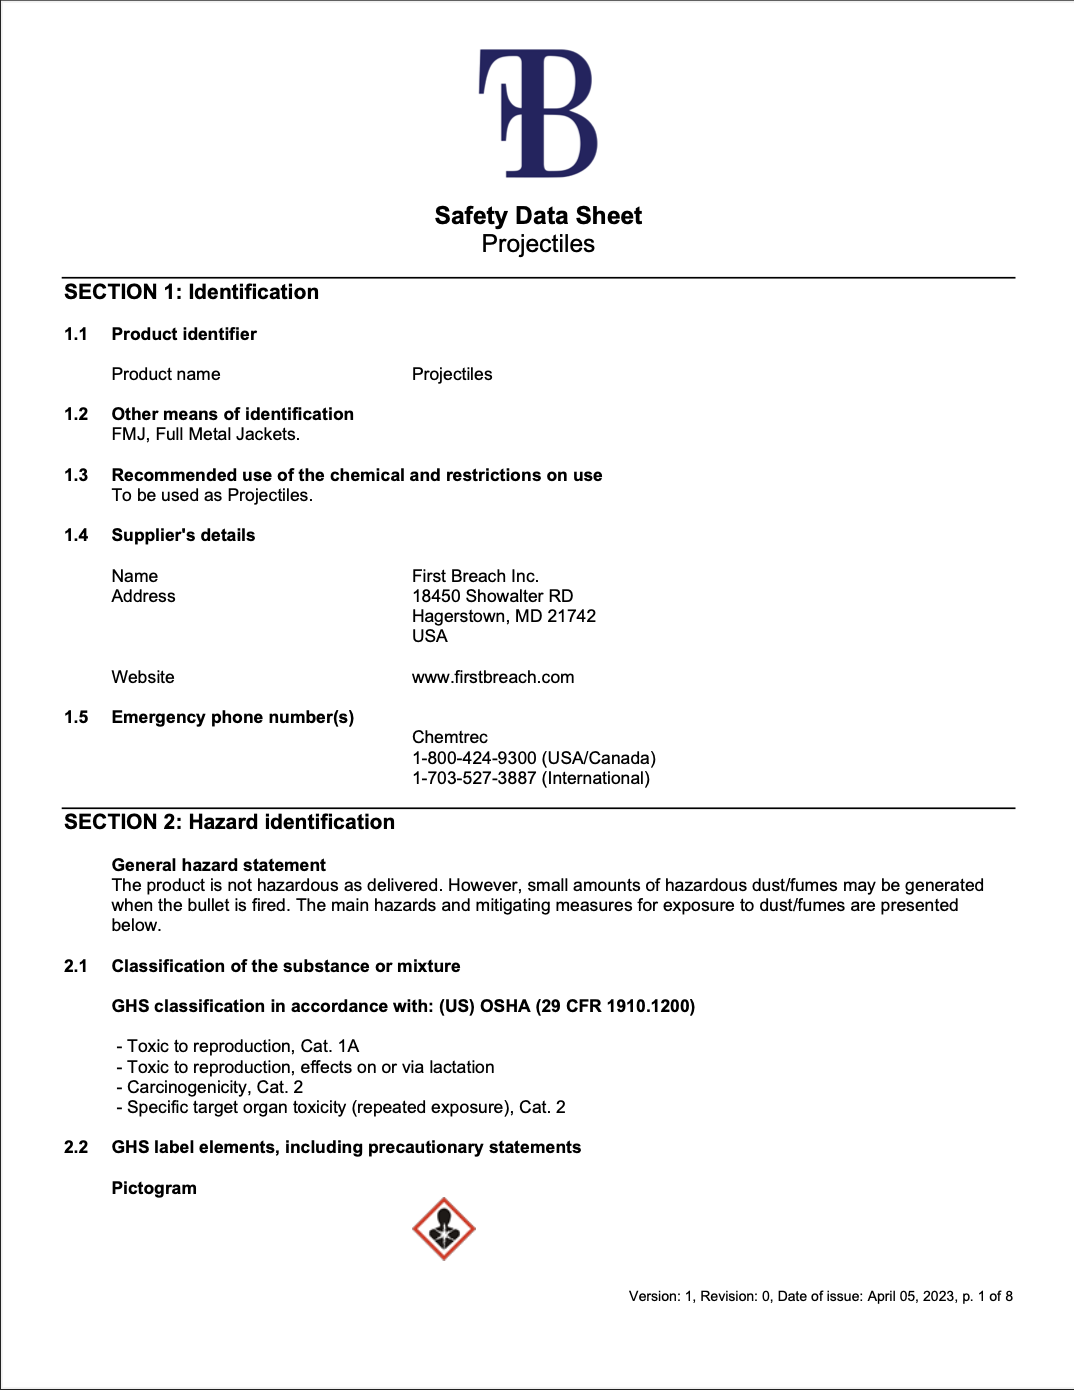 Projectiles Datasheet Front Page